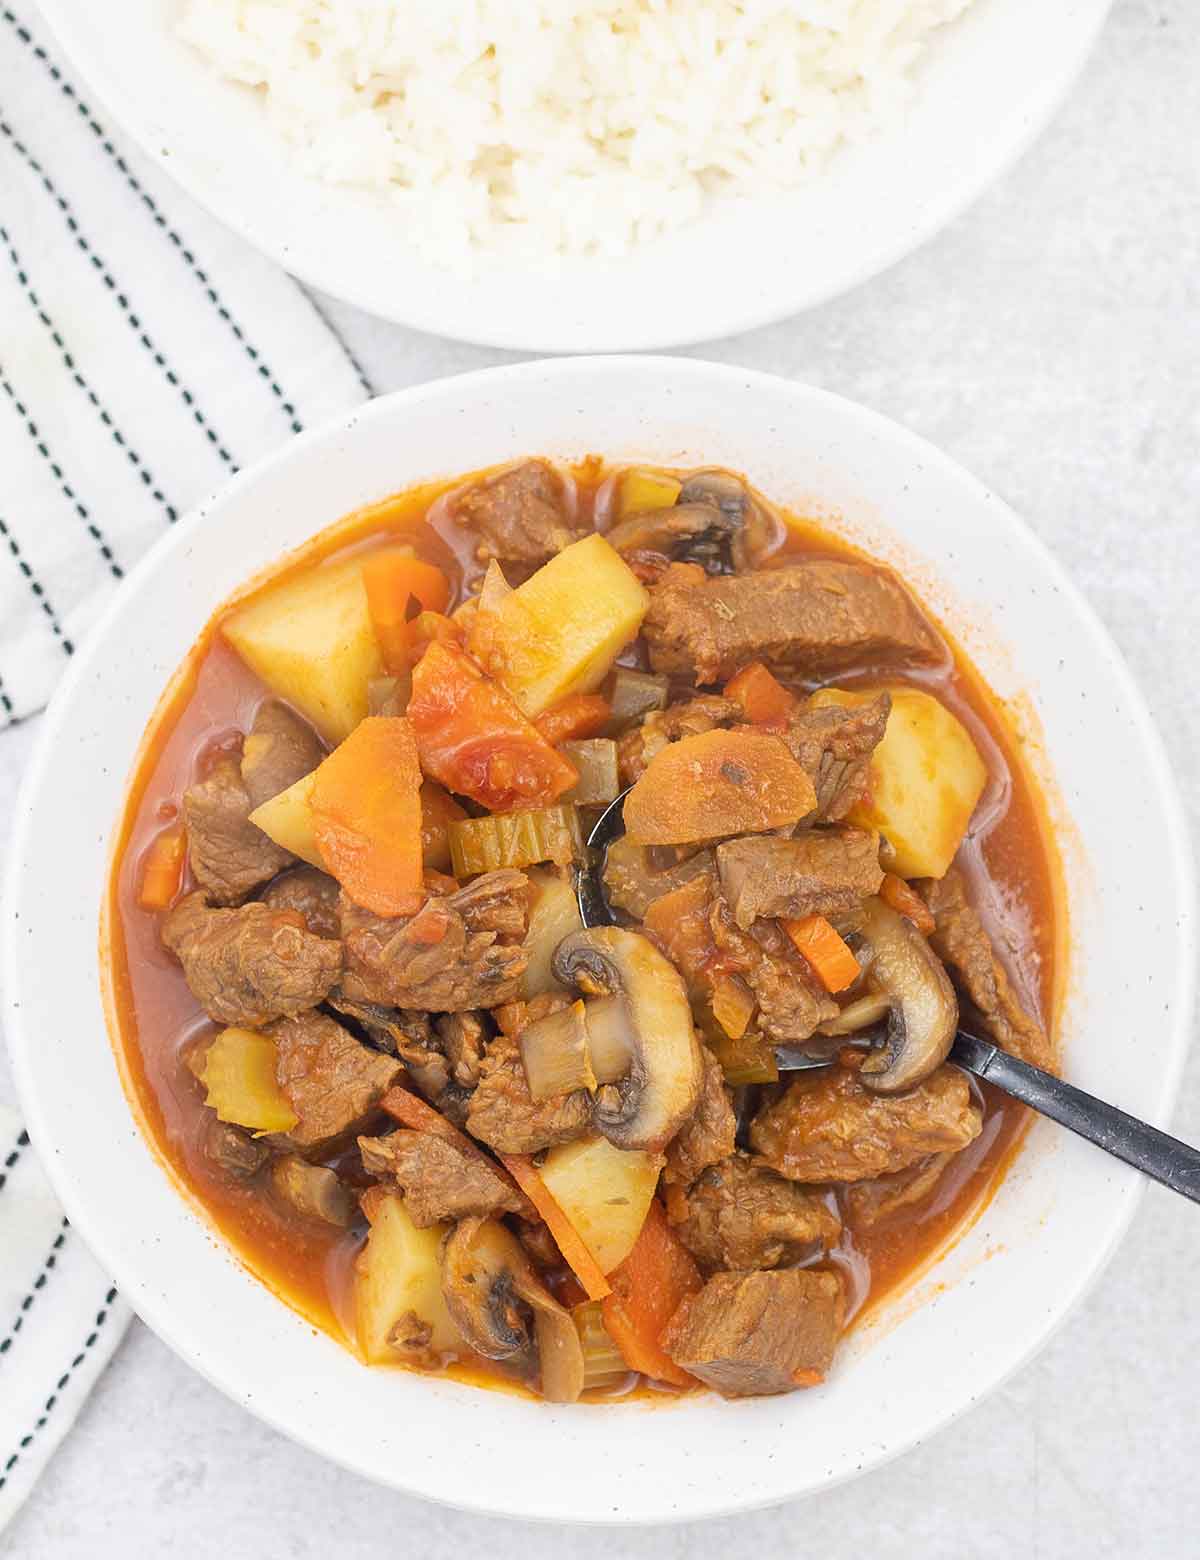 Beef stew with tomato sauce in a bowl.